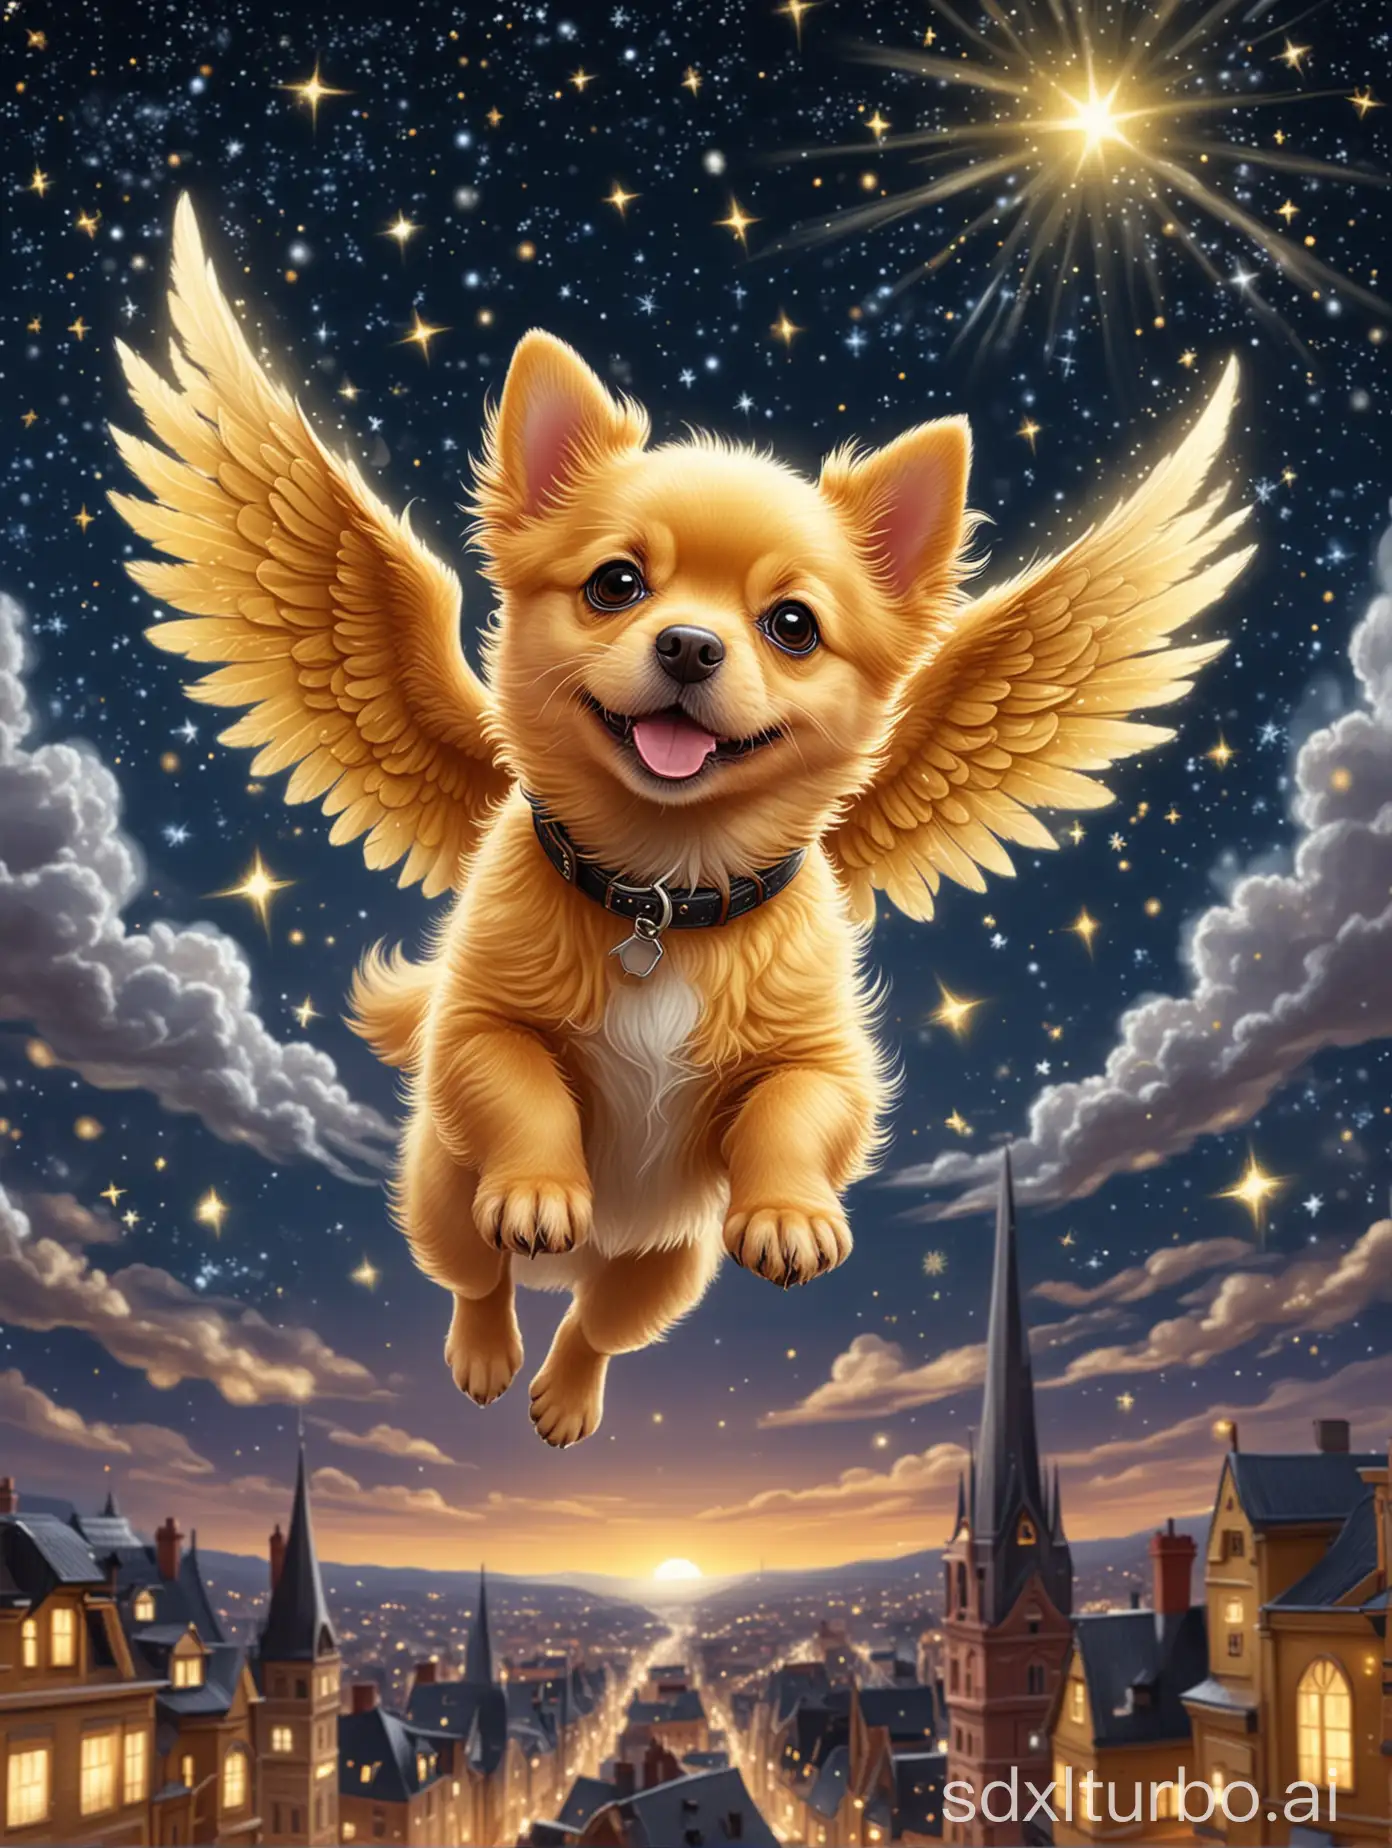 A cute little yellow dog, flying with wings in the sky above the city, the starry sky shining brightly.